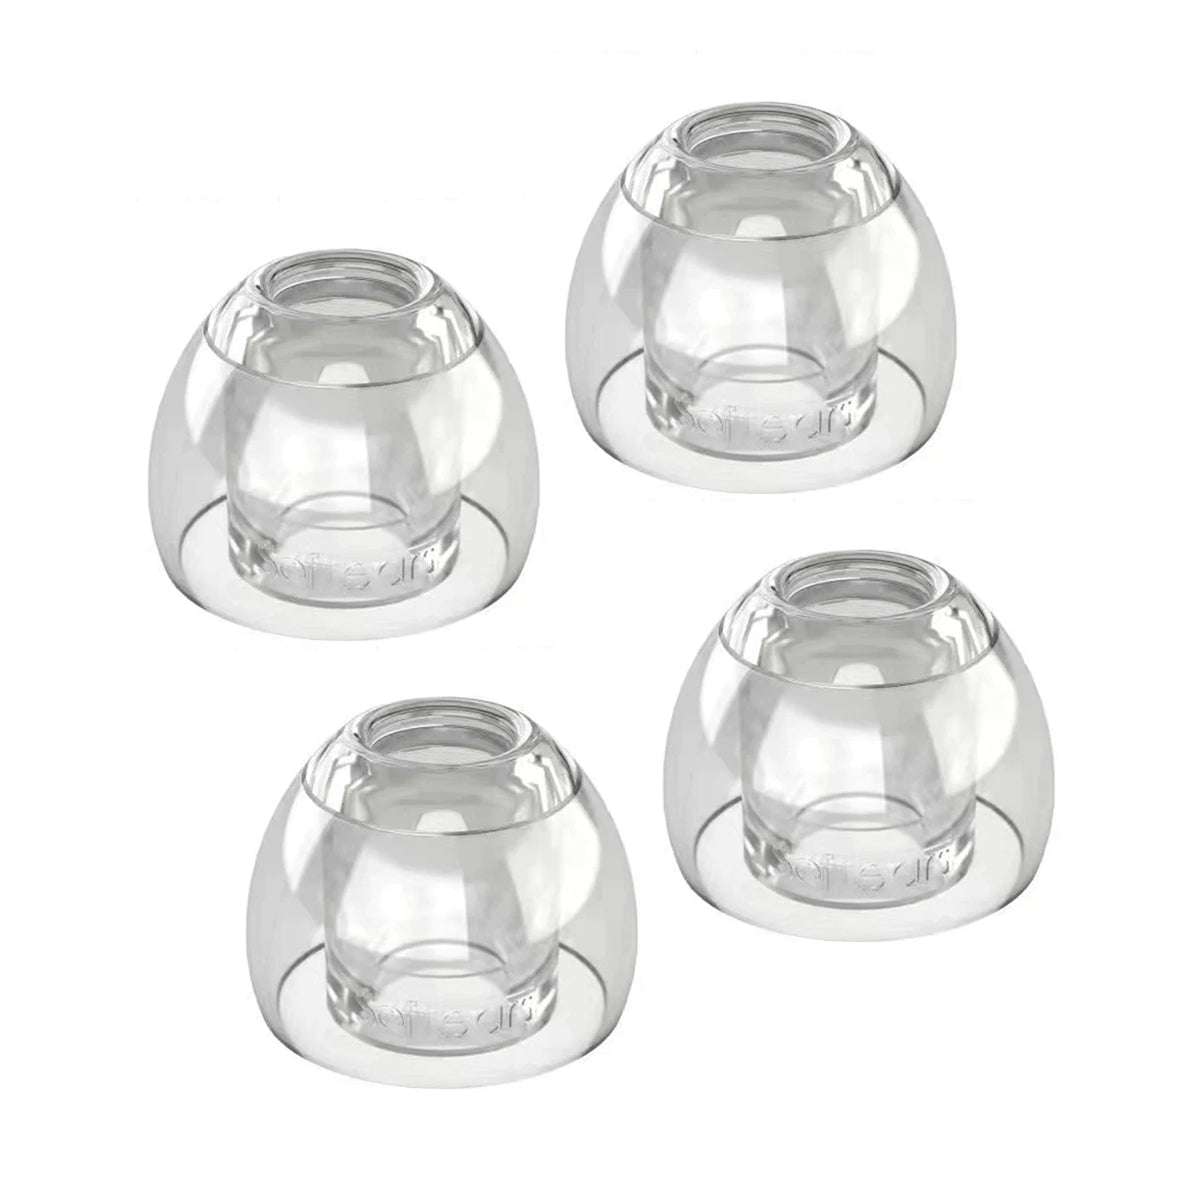 Softears UC Ultra Clear Liquid Silicone Eartips (2 Pairs)